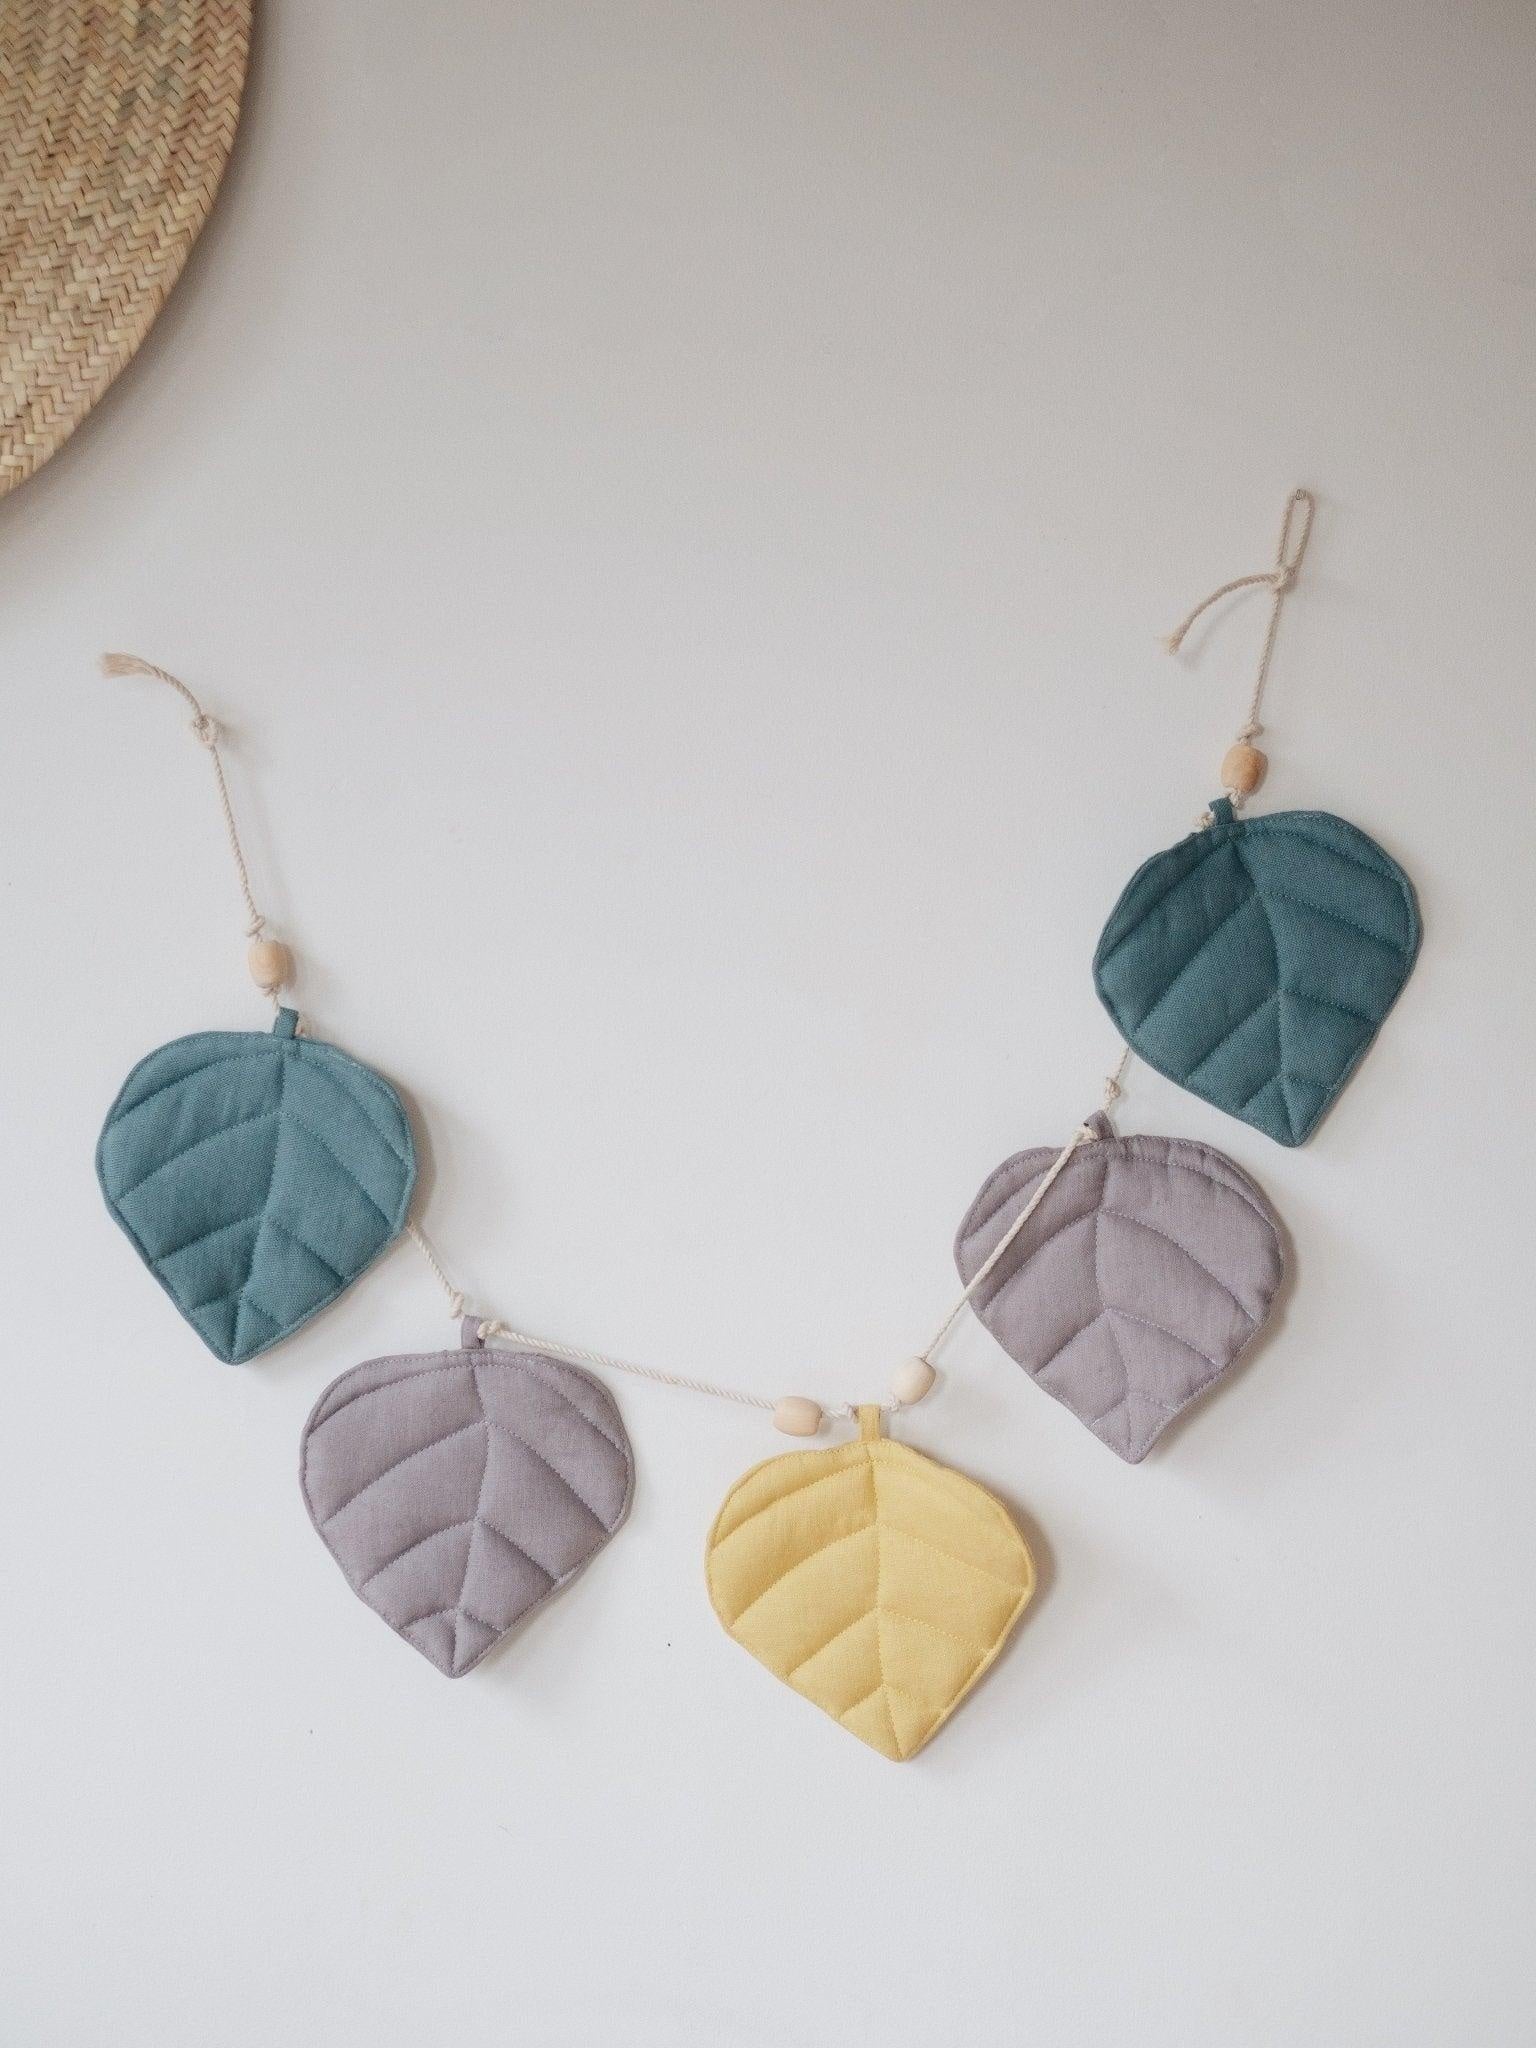 “Eye of the Sea” Linen Garland with Leaves